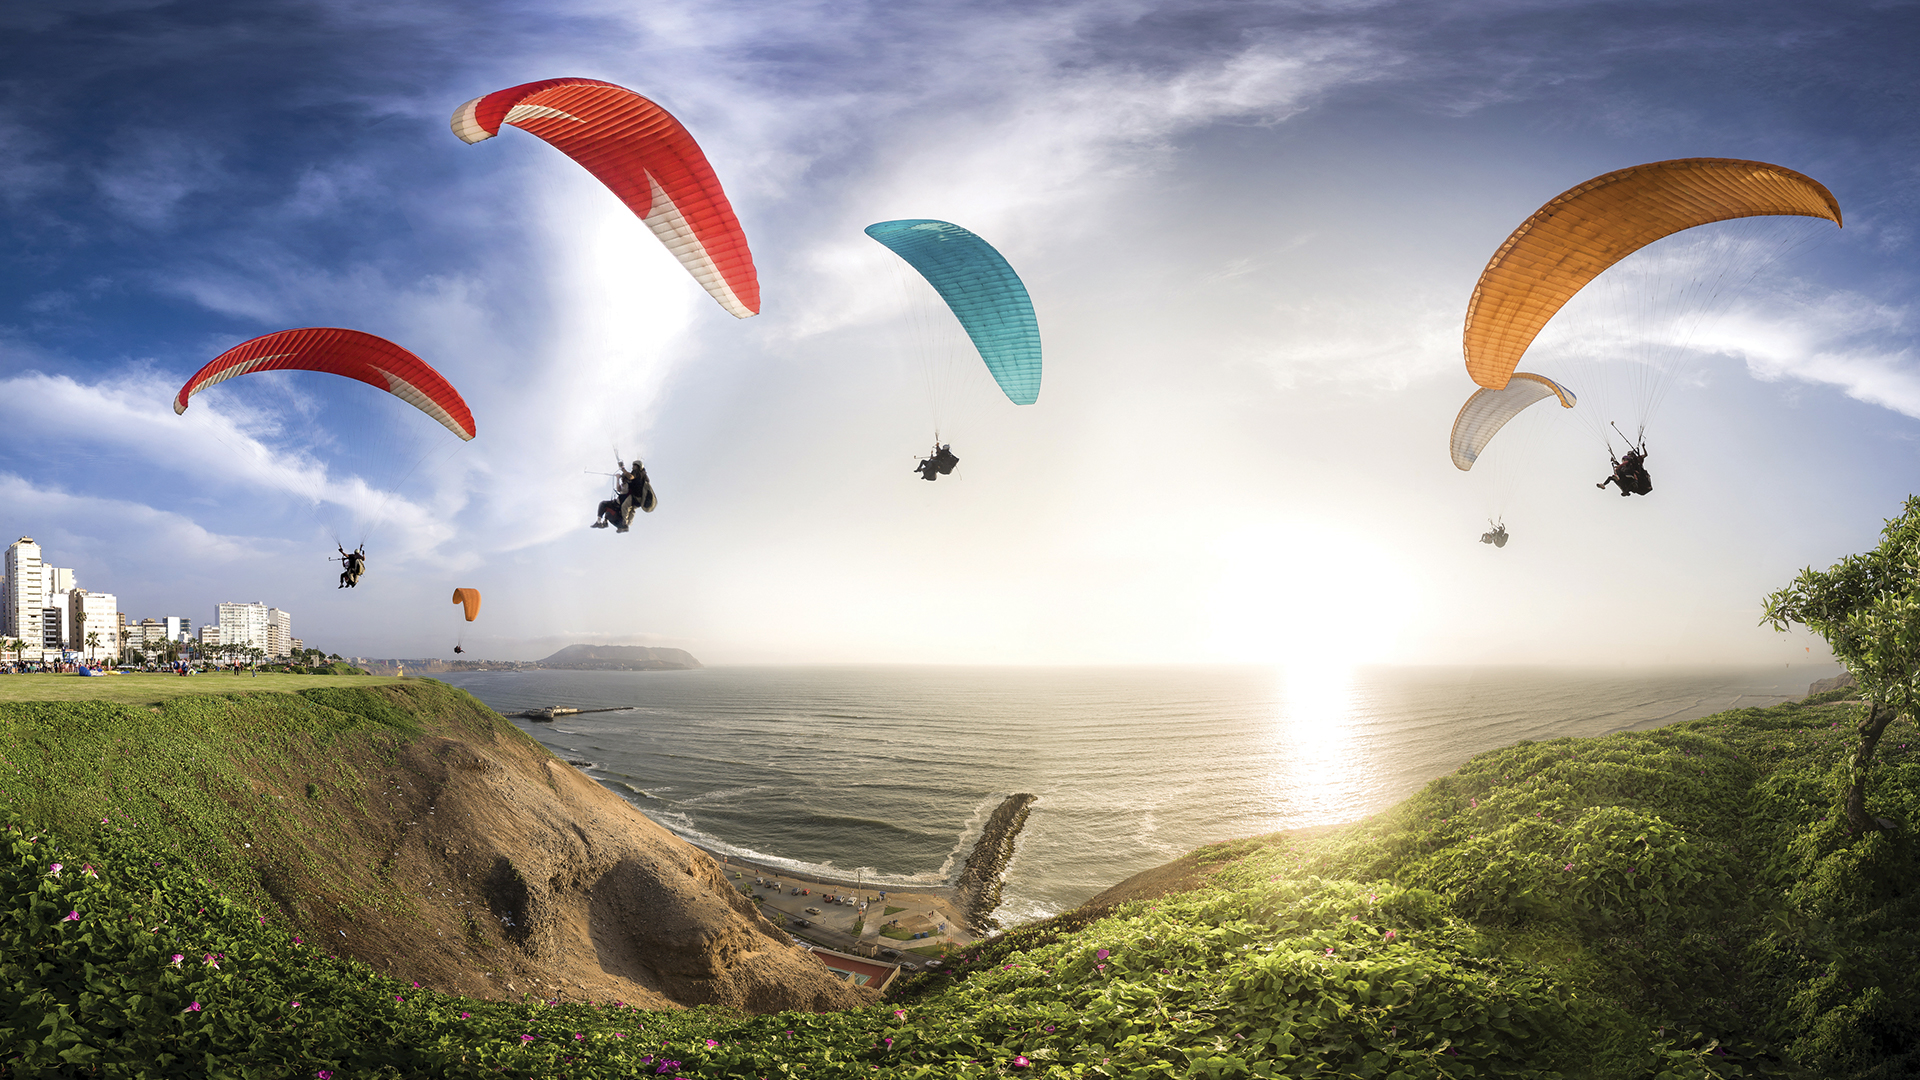 Paragliders at Miraflores in Lima